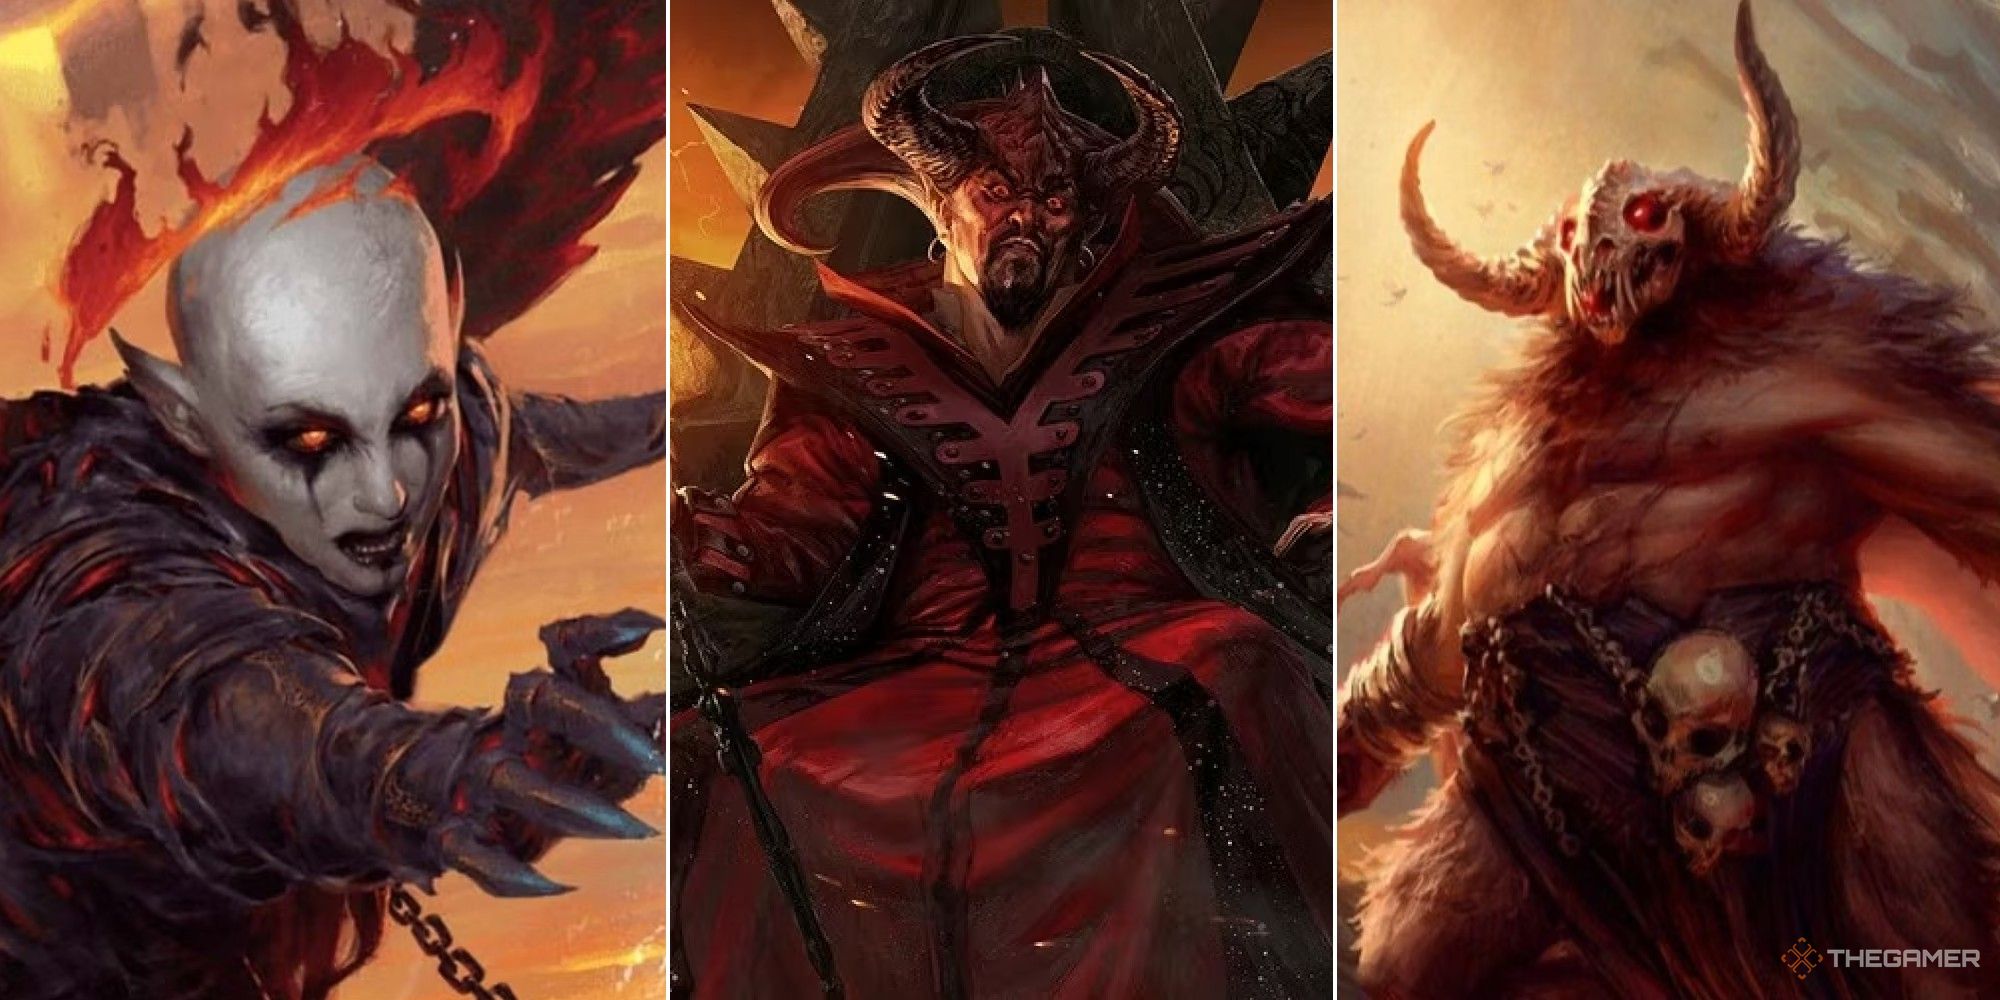 Dungeons & Dragons collage showing Zariel, Asmodeus and Orcus